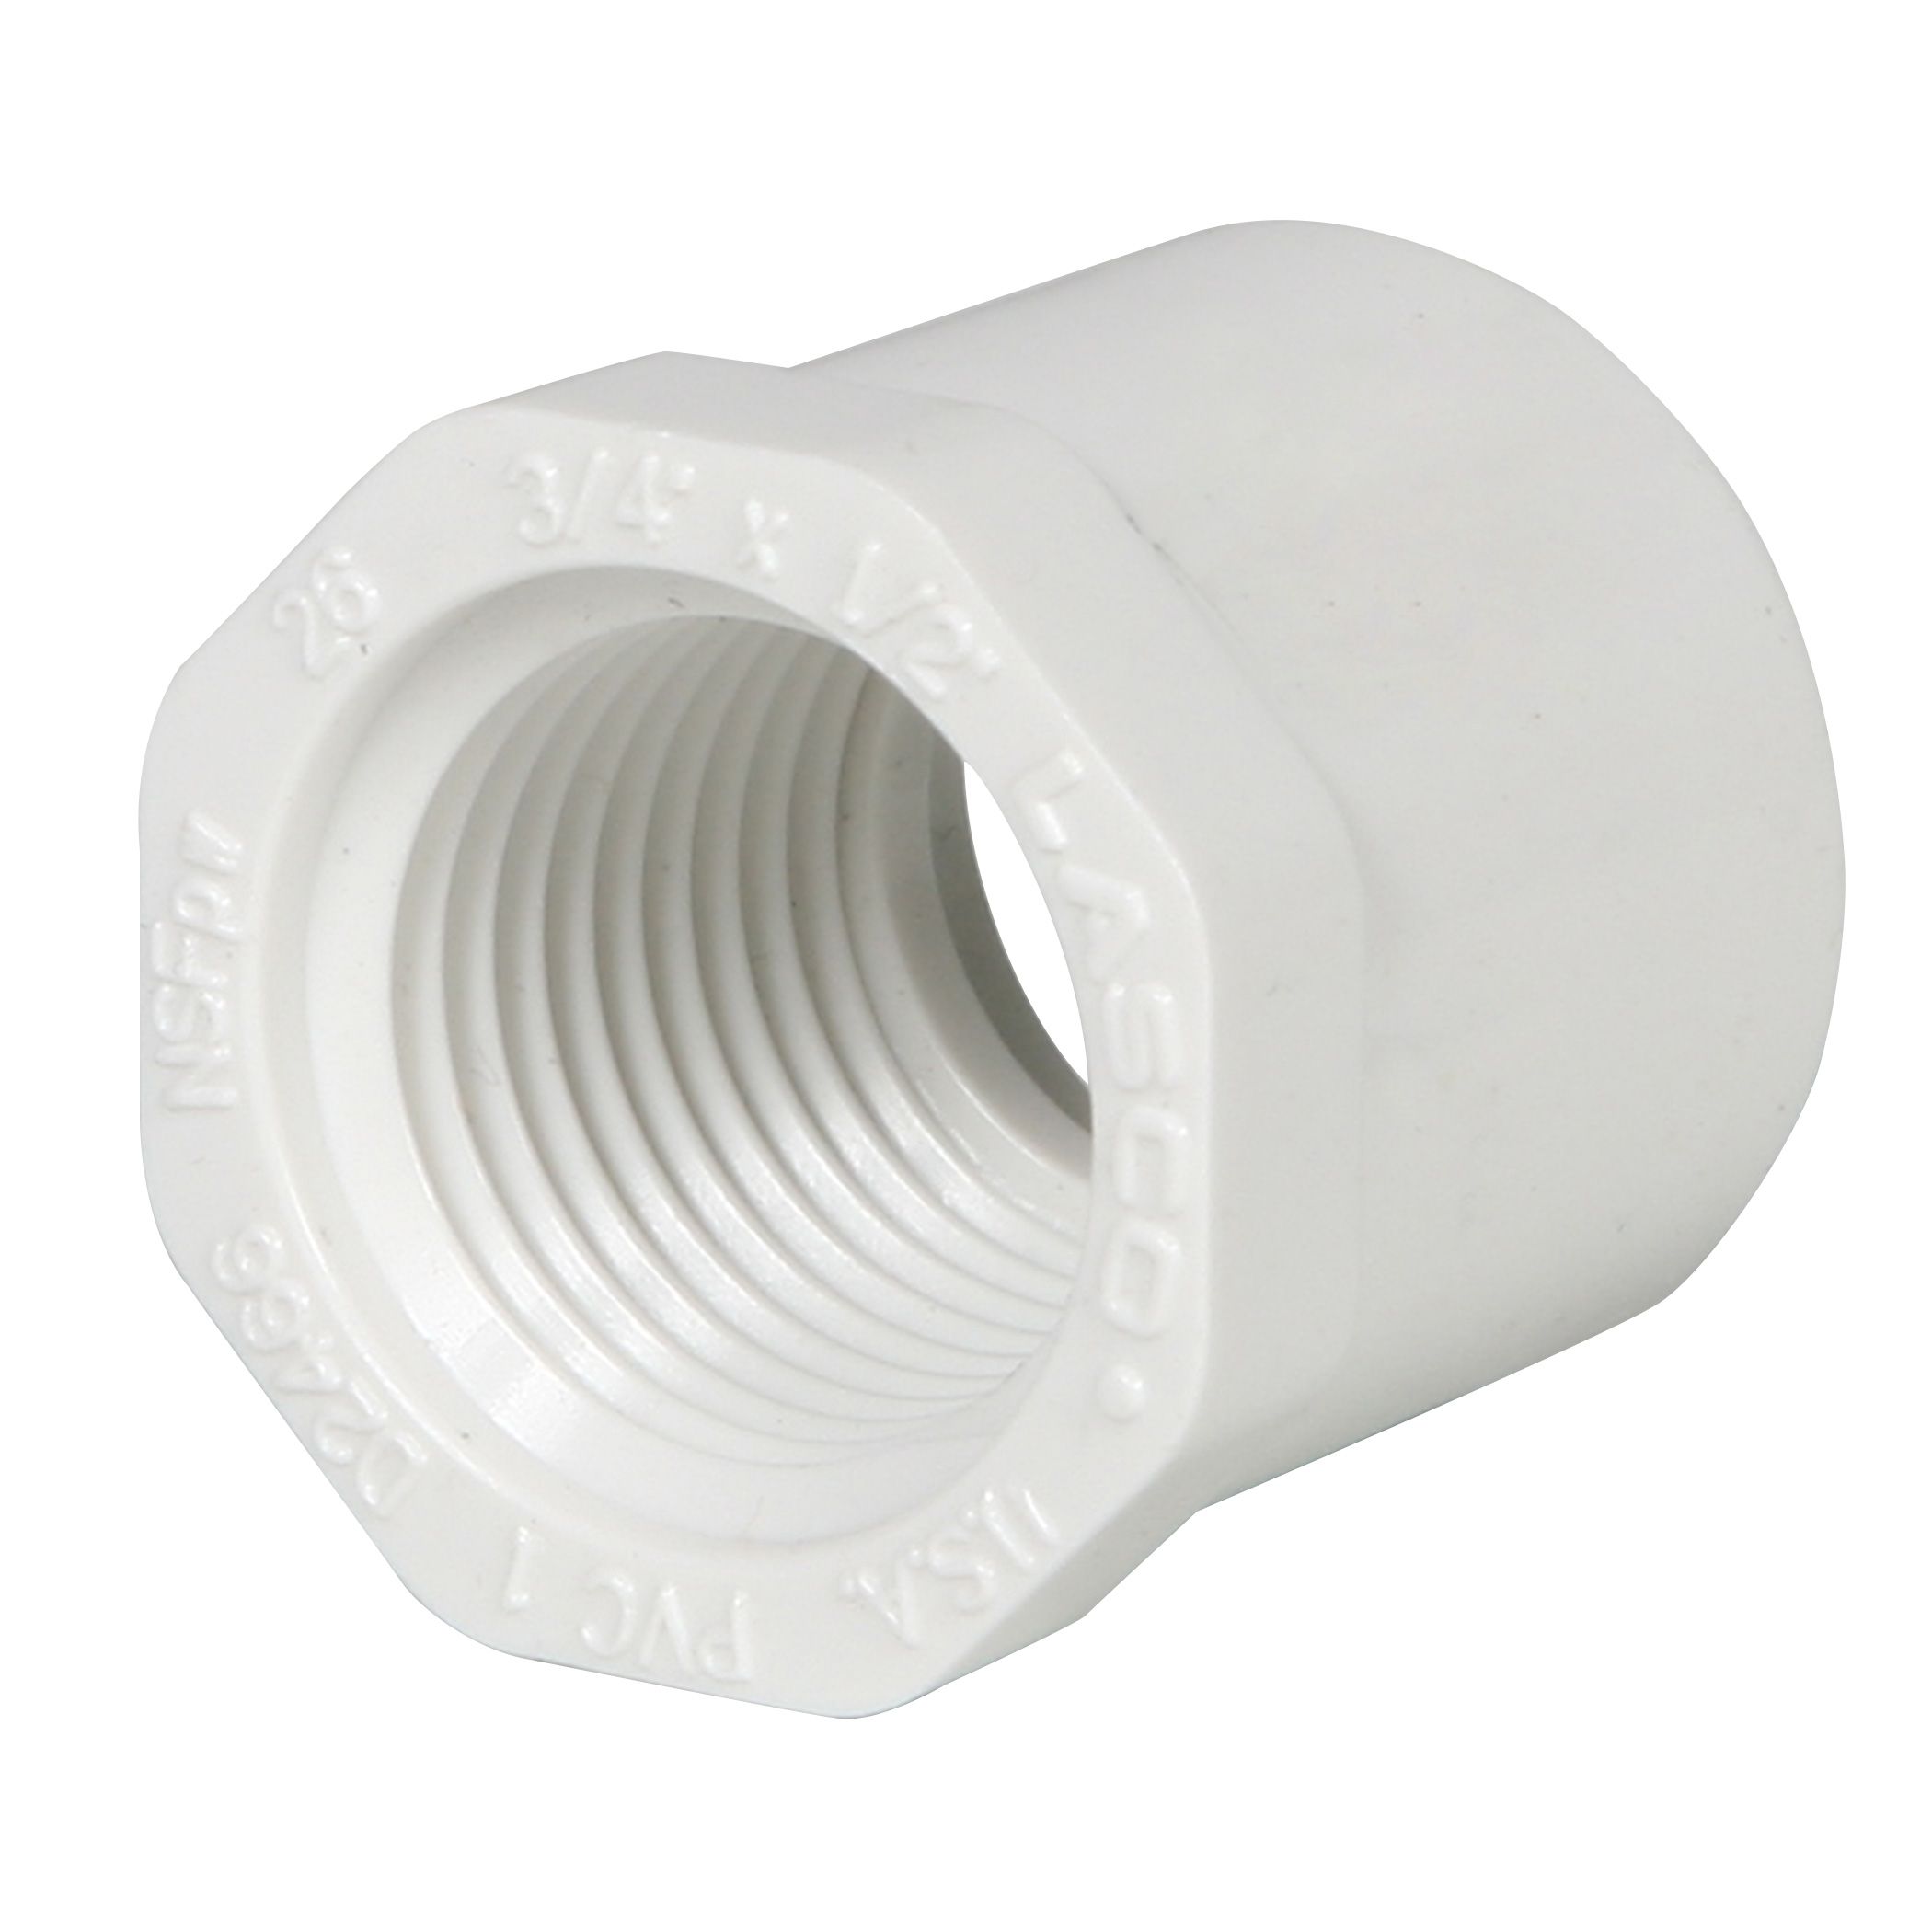 Details about   3/4 x 1/2 Conduit Reducer Bushing Threaded PVC Taymac Hubbell For Non Metallic 